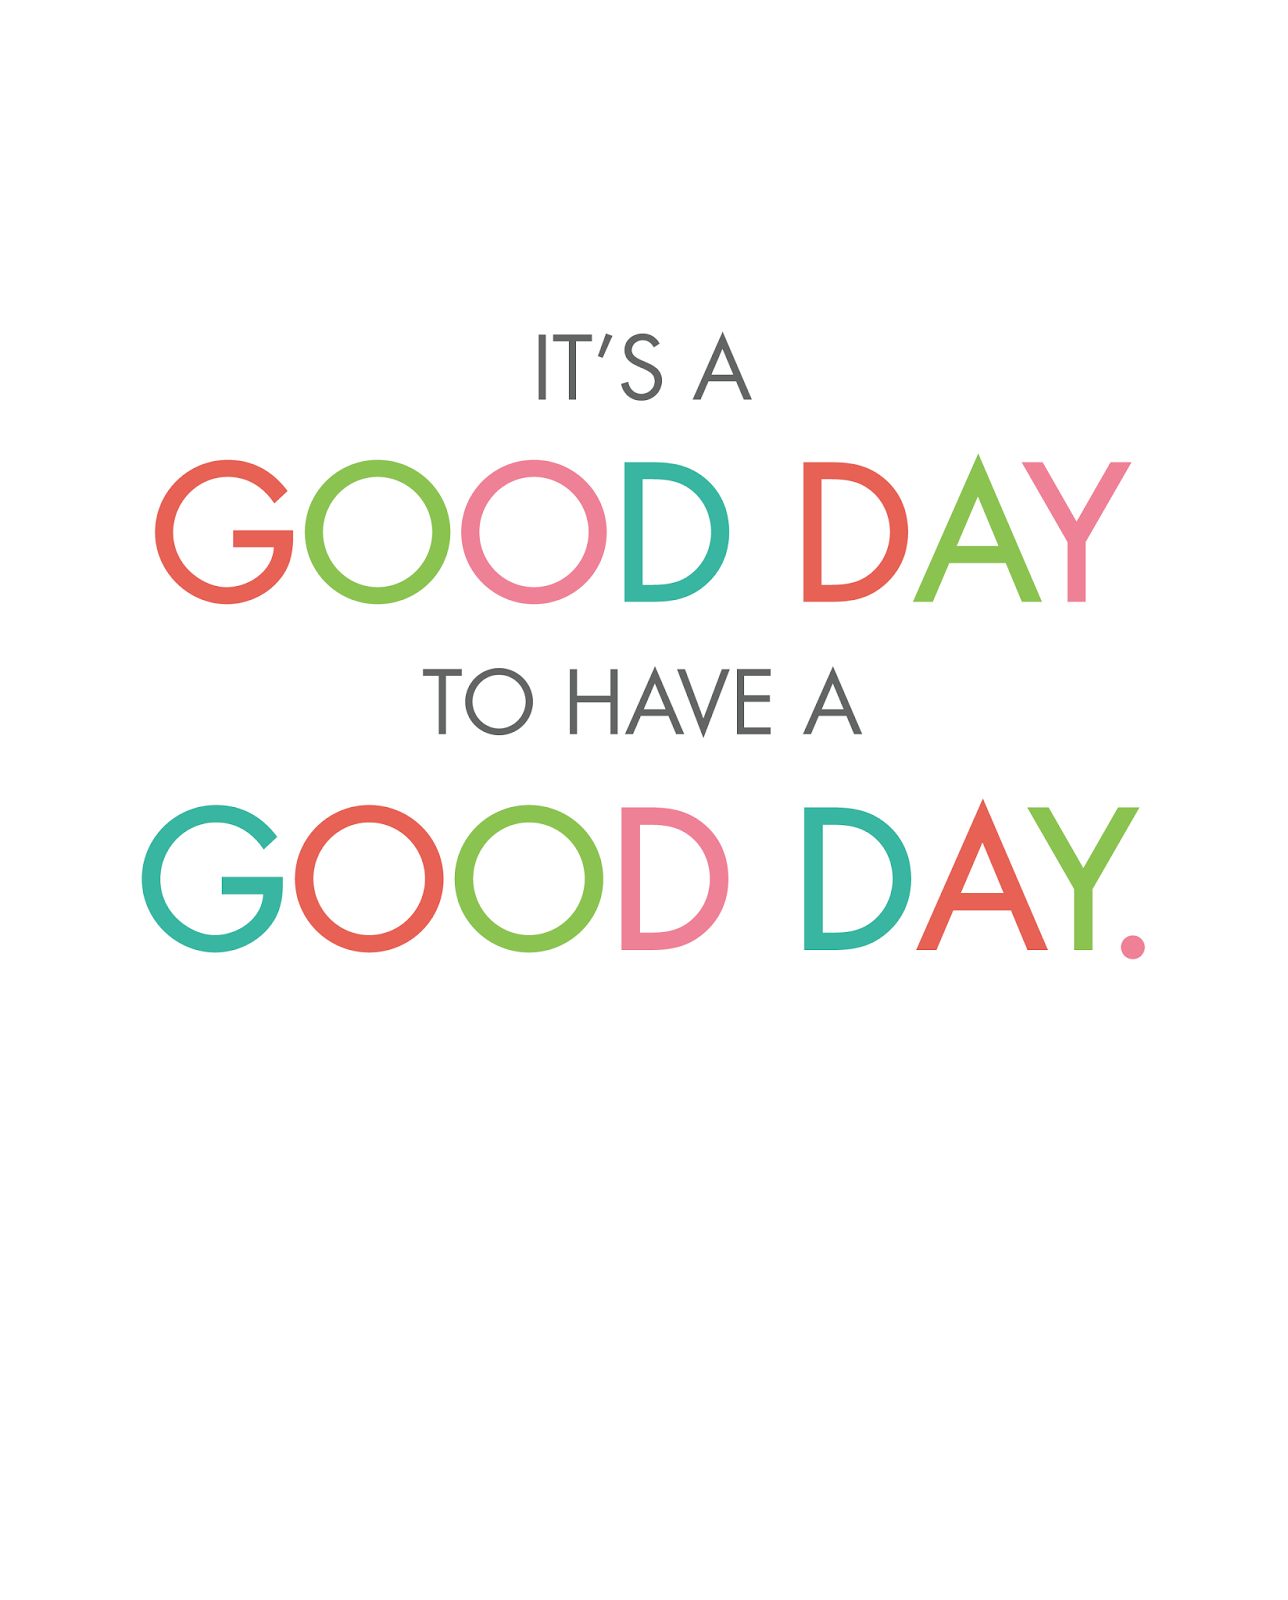 Oh So Lovely: IT'S A GOOD DAY PRINTABLES!. Good day quotes, Inspirational quotes, Wallpaper quotes